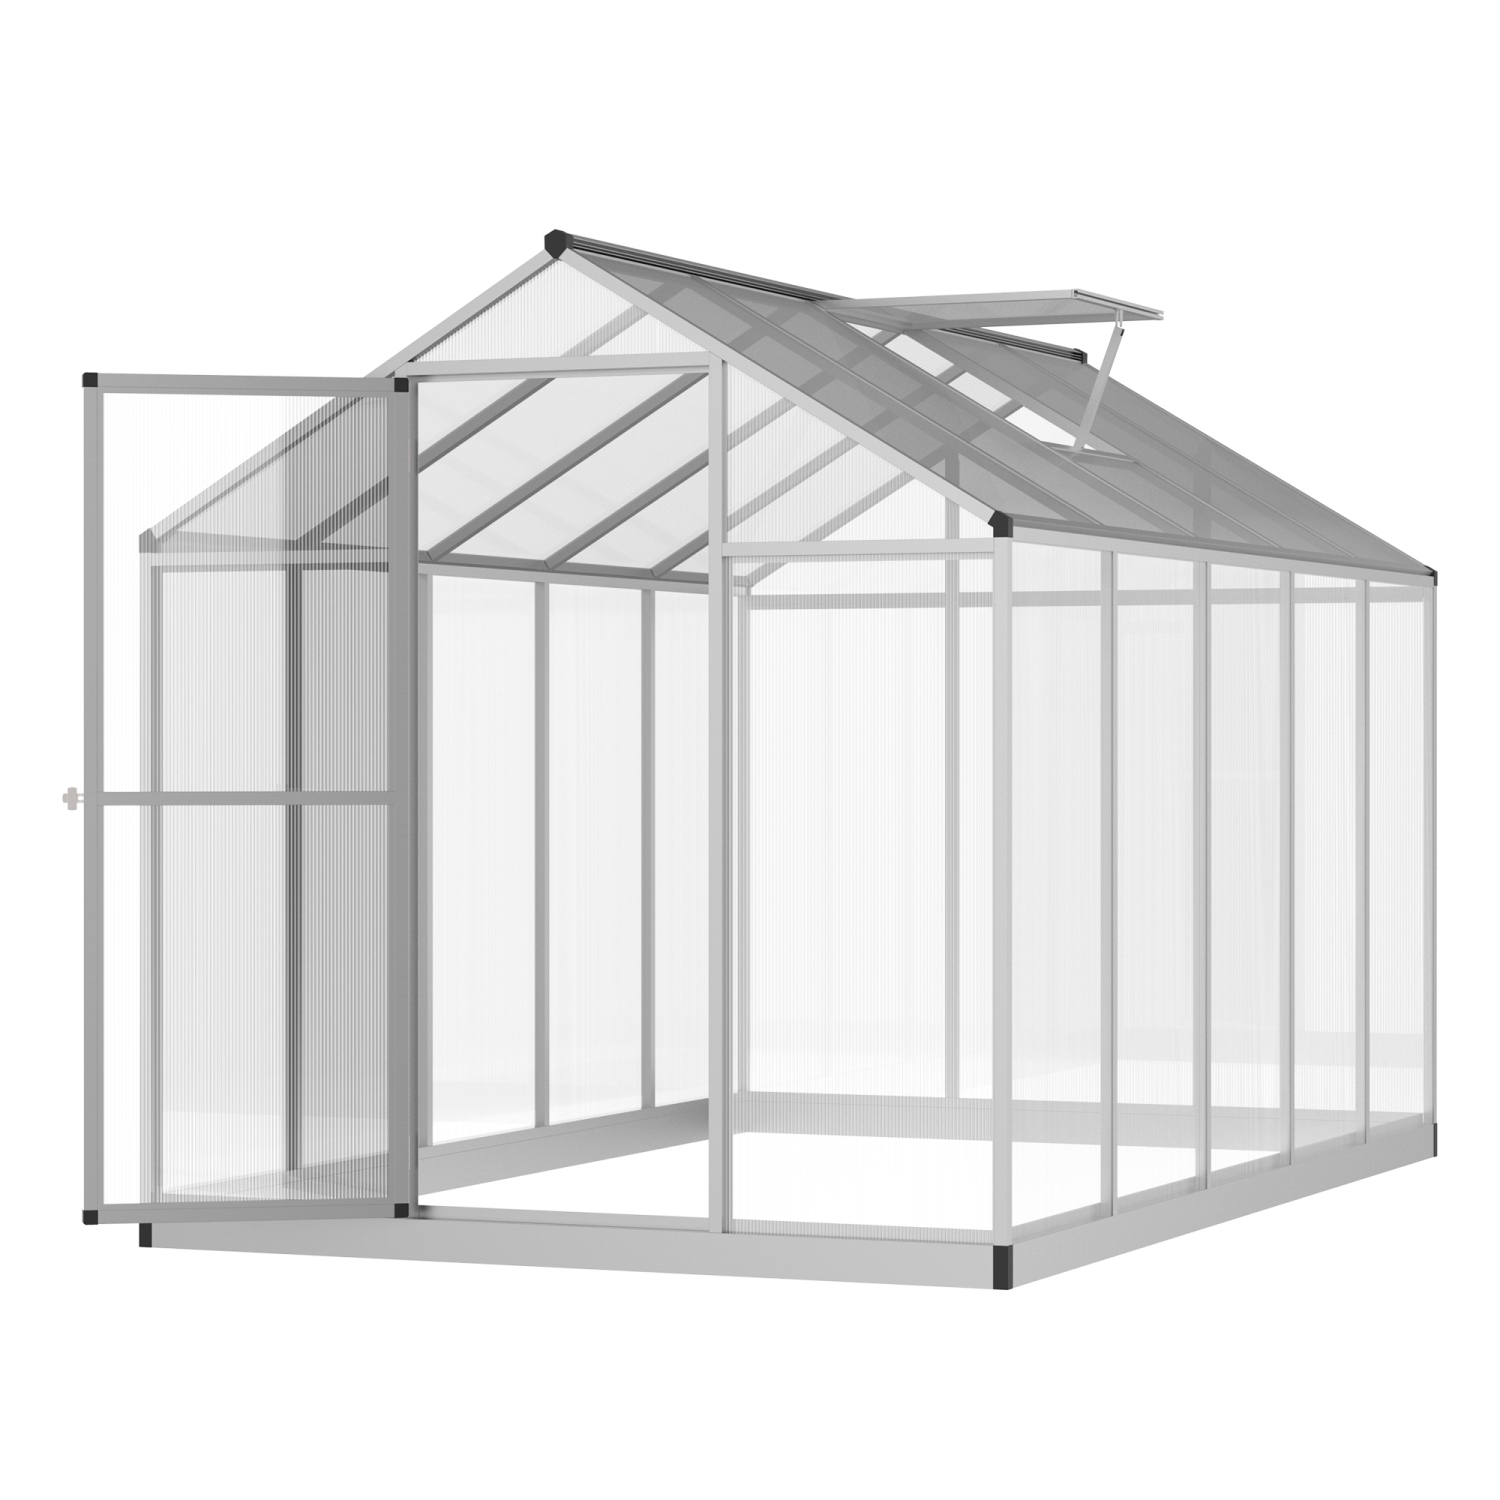 Outsunny 10' x 6' x 6.4' Walk-in Garden Greenhouse Polycarbonate Panels Plants Flower Growth Shed Cold Frame Outdoor Portable Warm House Aluminum Frame